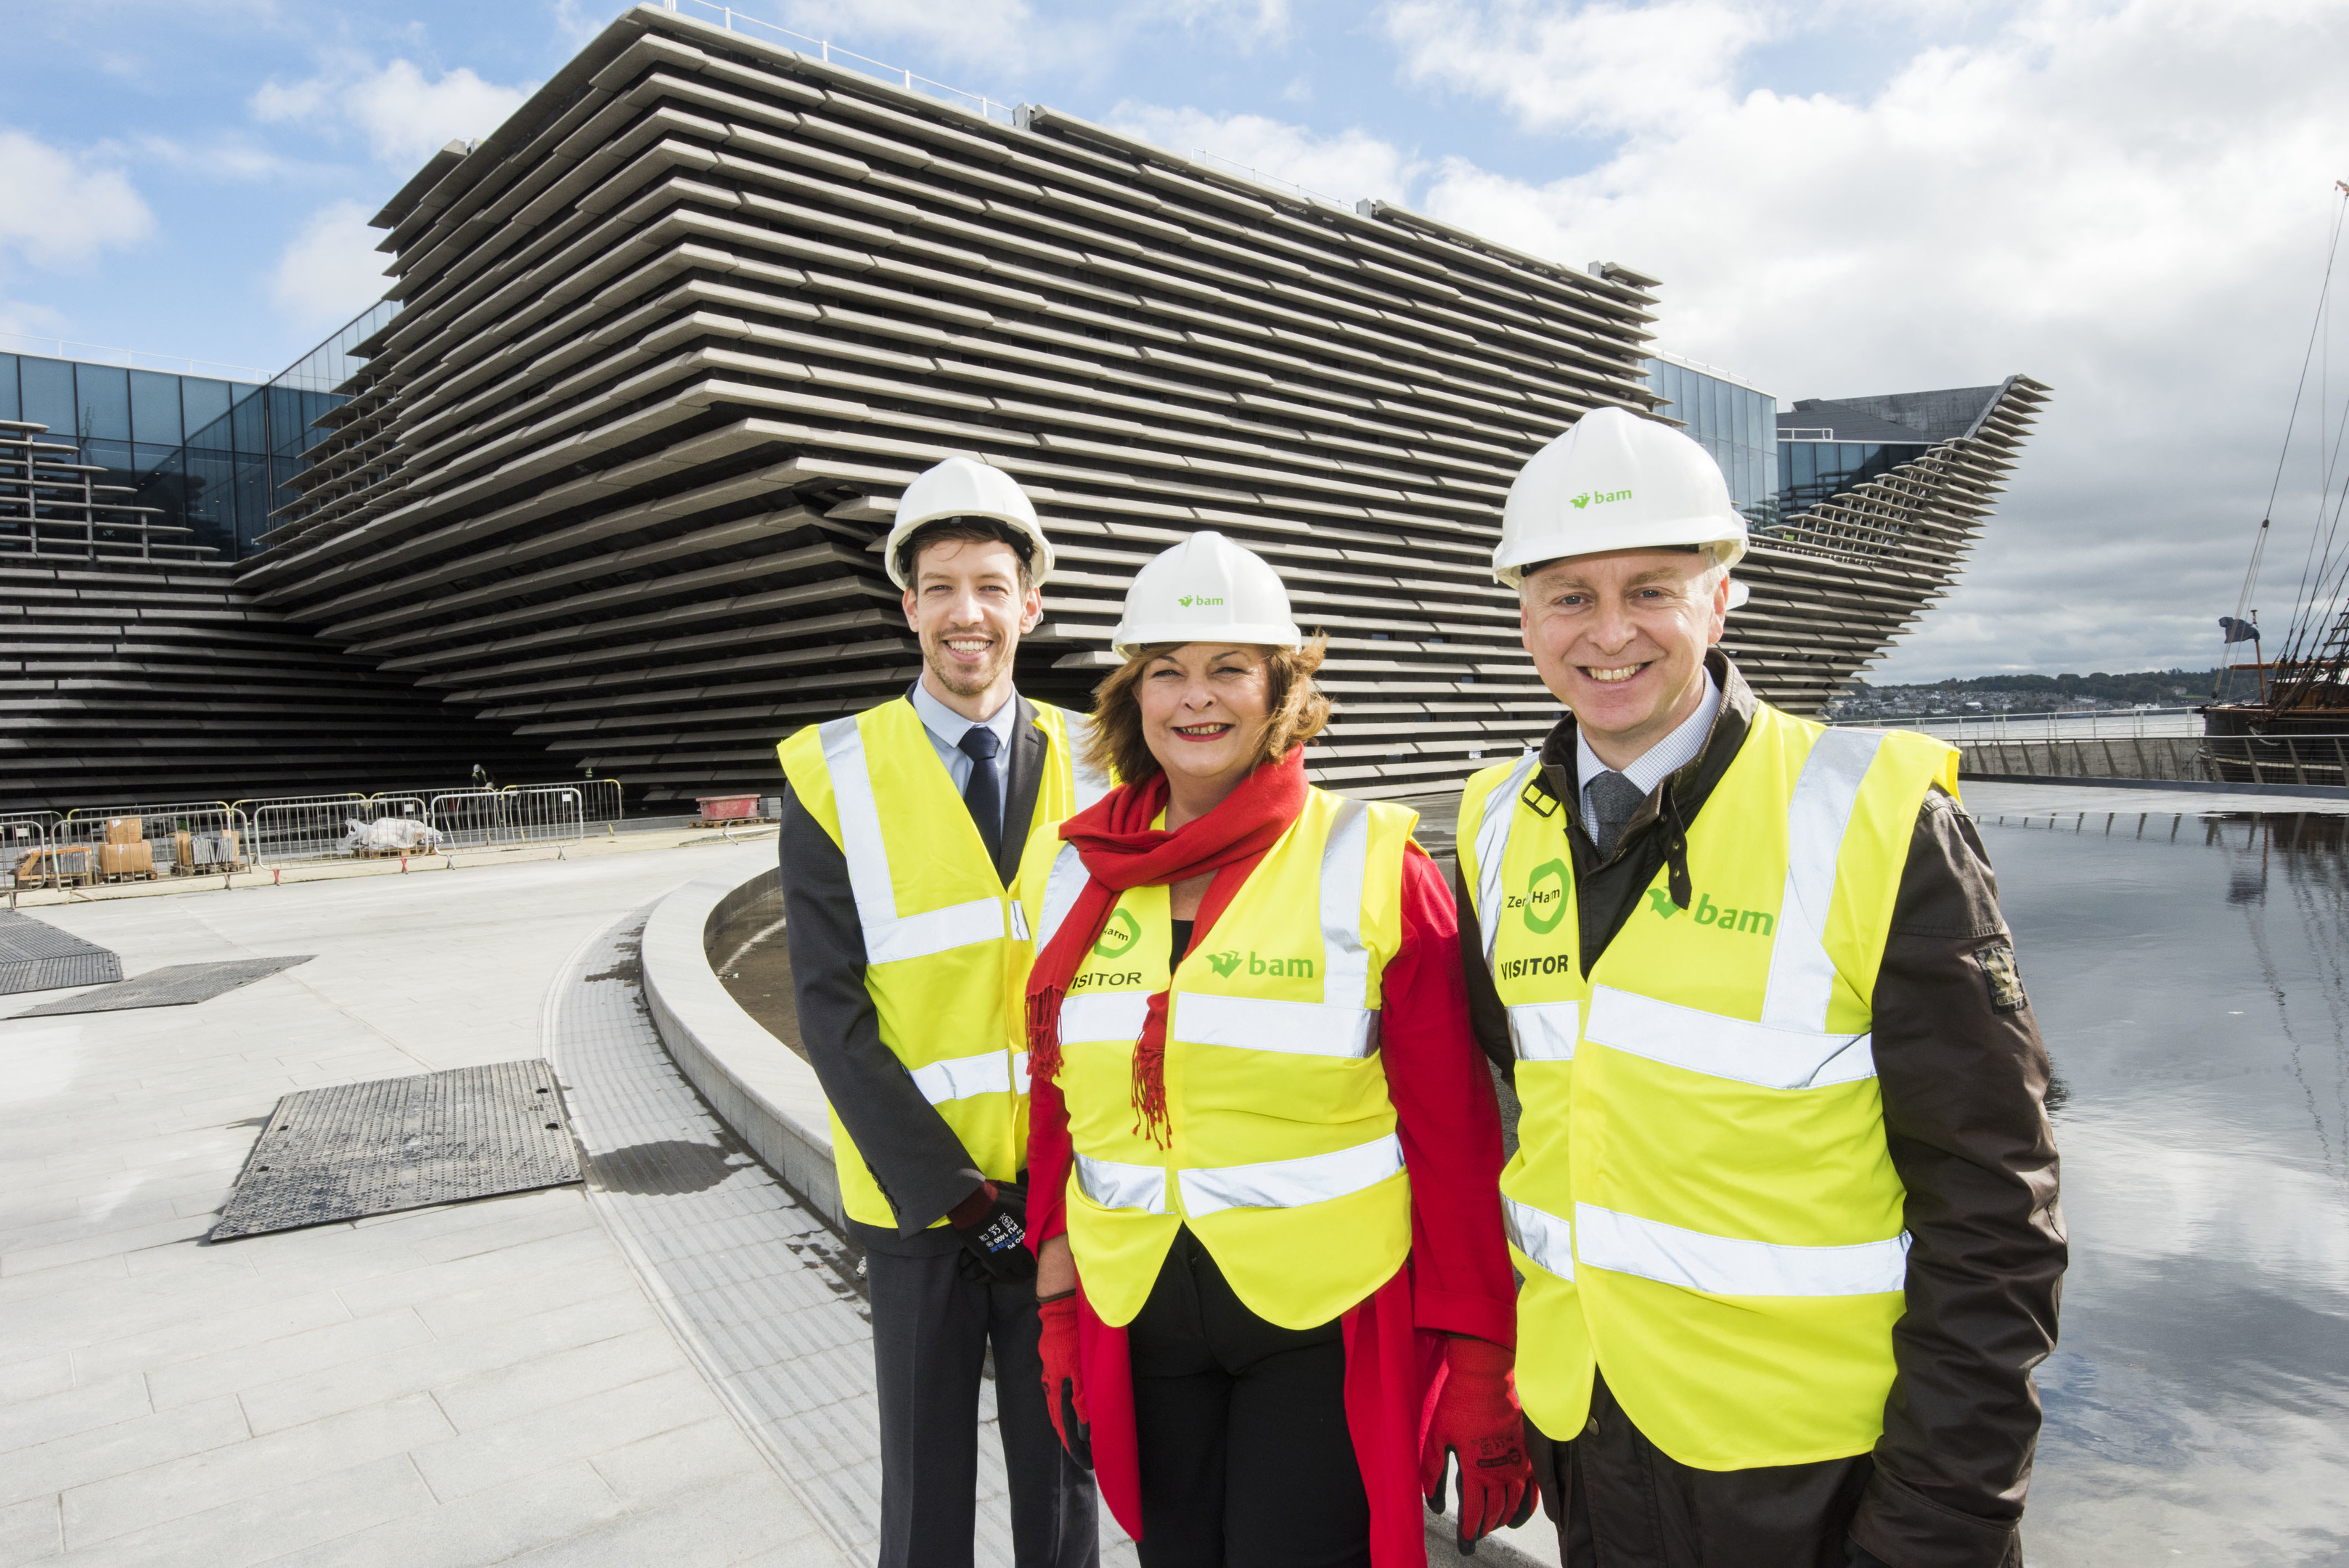 Culture secretary Fiona Hyslop with Dundee City Council leader John Alexander and V&A director Philip Long.